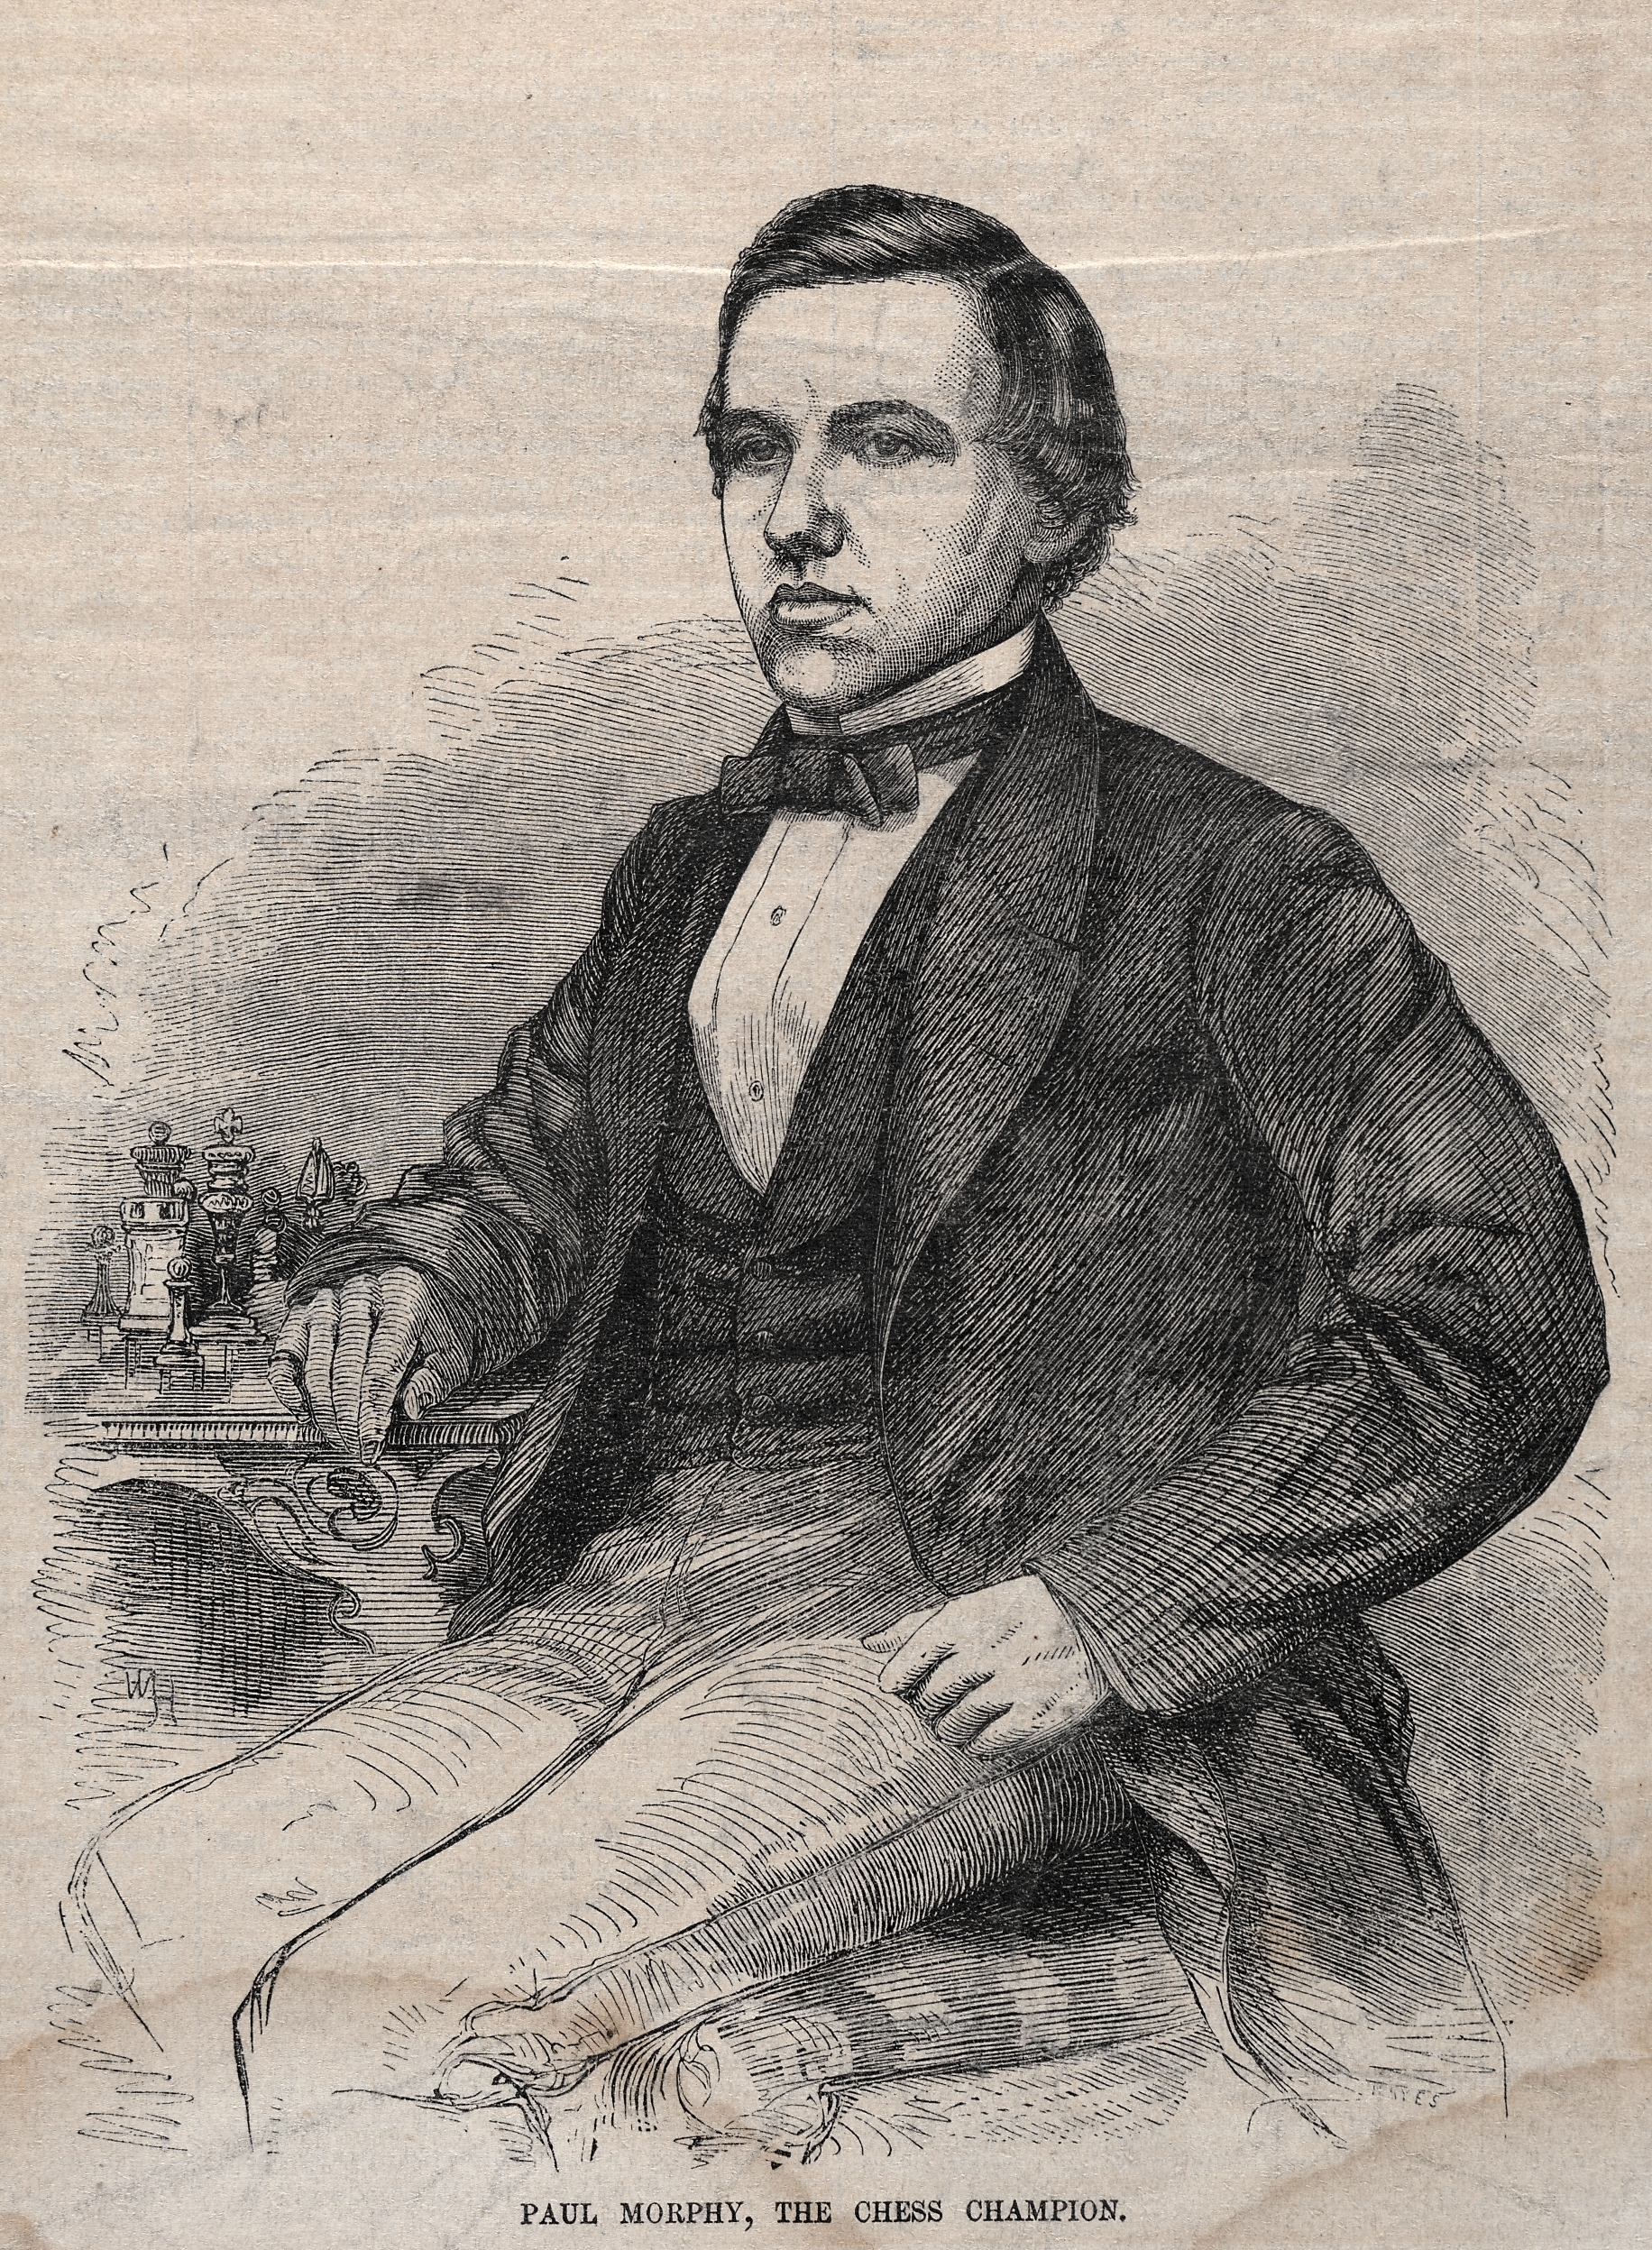 Paul Morphy, The Chess Champion